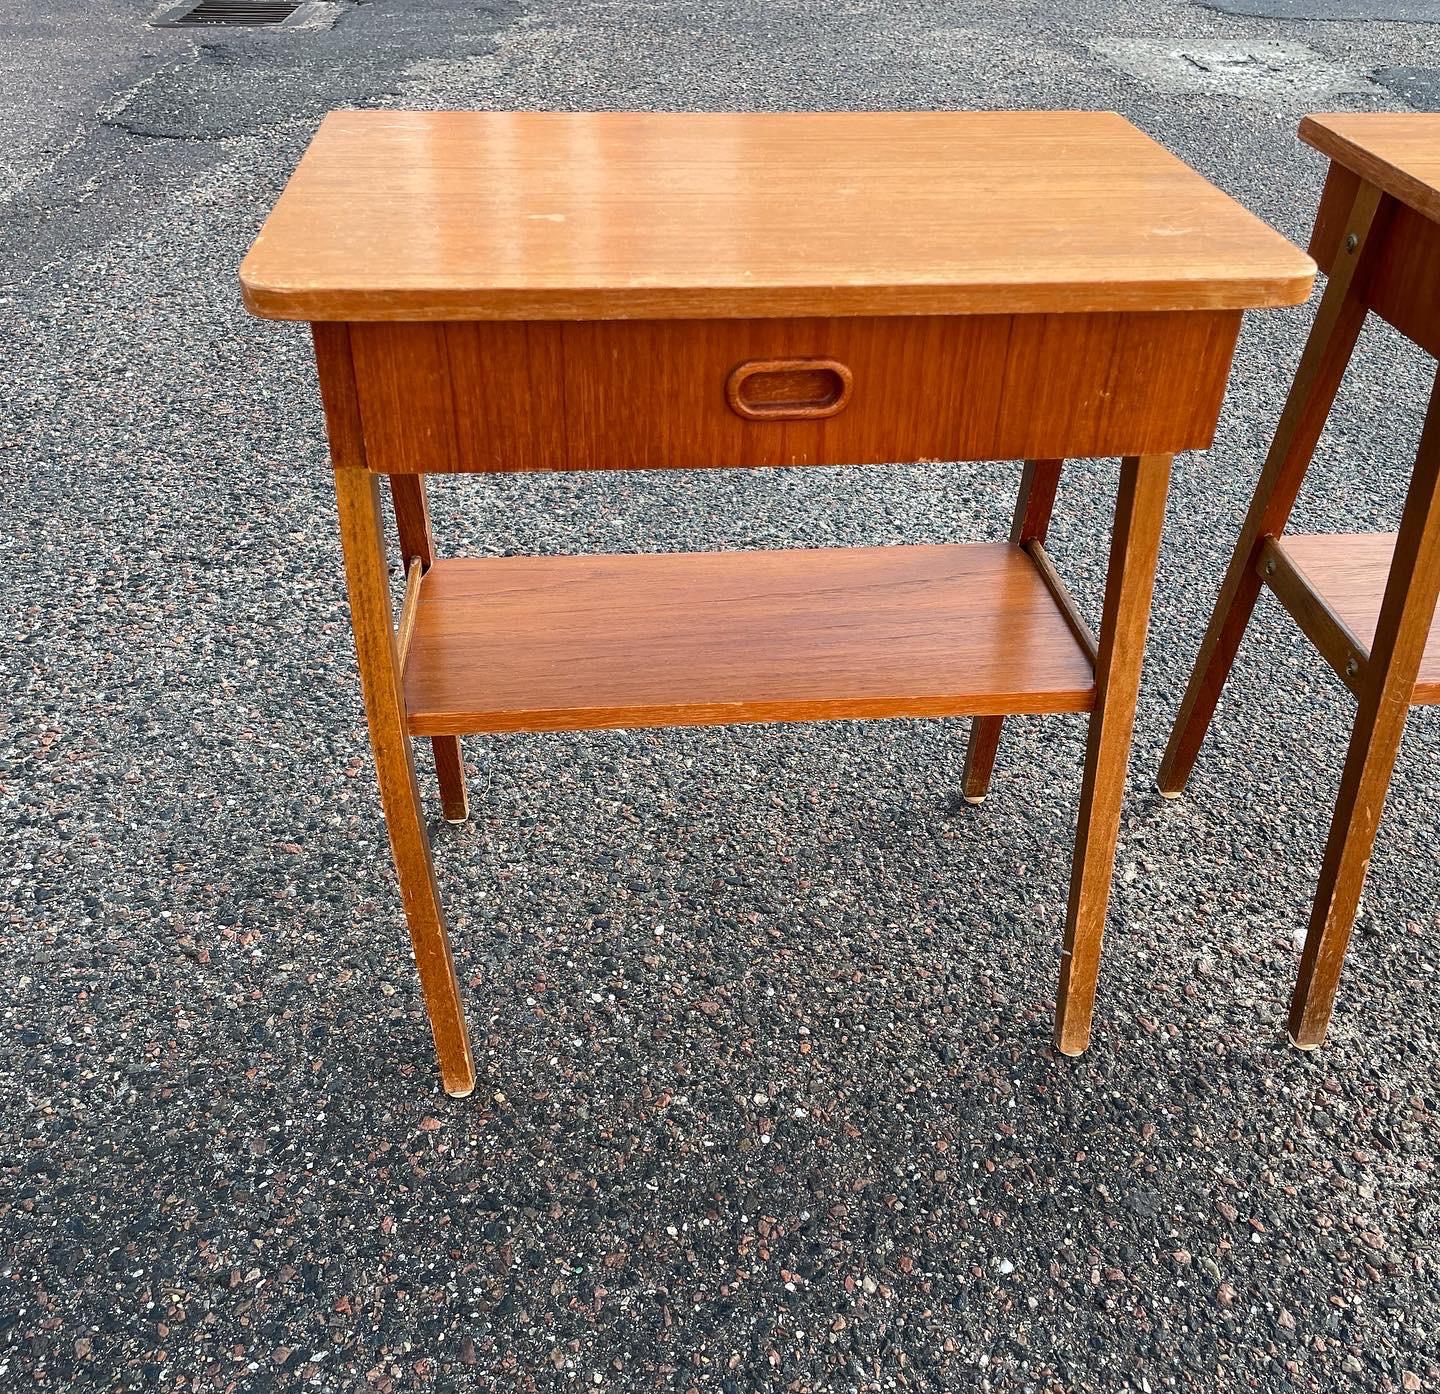 Mid-Century Modern Swedish Night Stands in Teak, 1960's For Sale 3